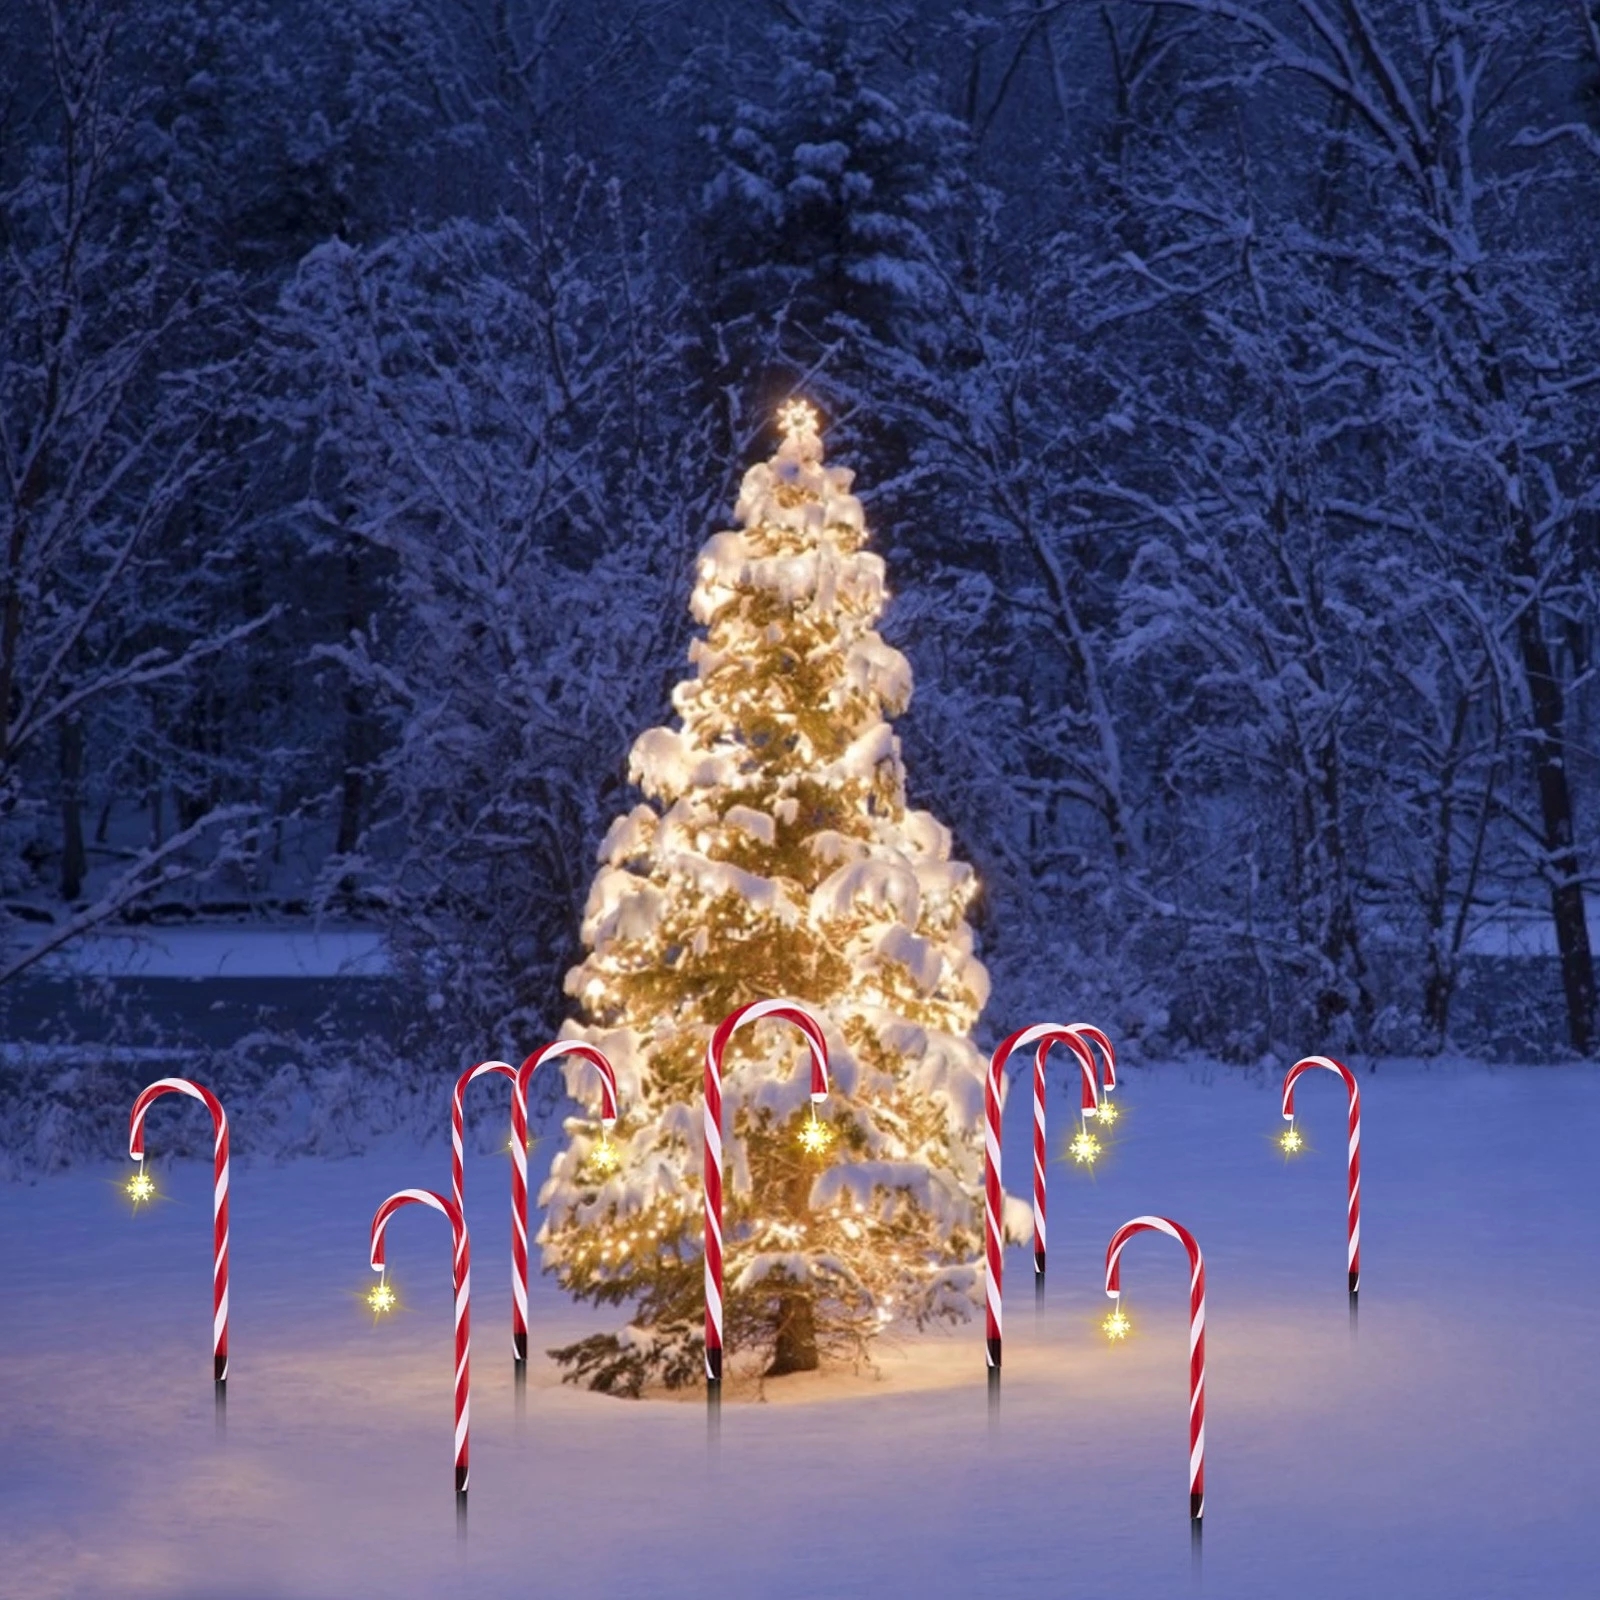 Christmas-LED-Candy-Star-Crutch-Lamp-Christmas-Solar-Lawn-Lamp-Outdoor-In-Ground-Lights-Christmas-Tr-1913952-6